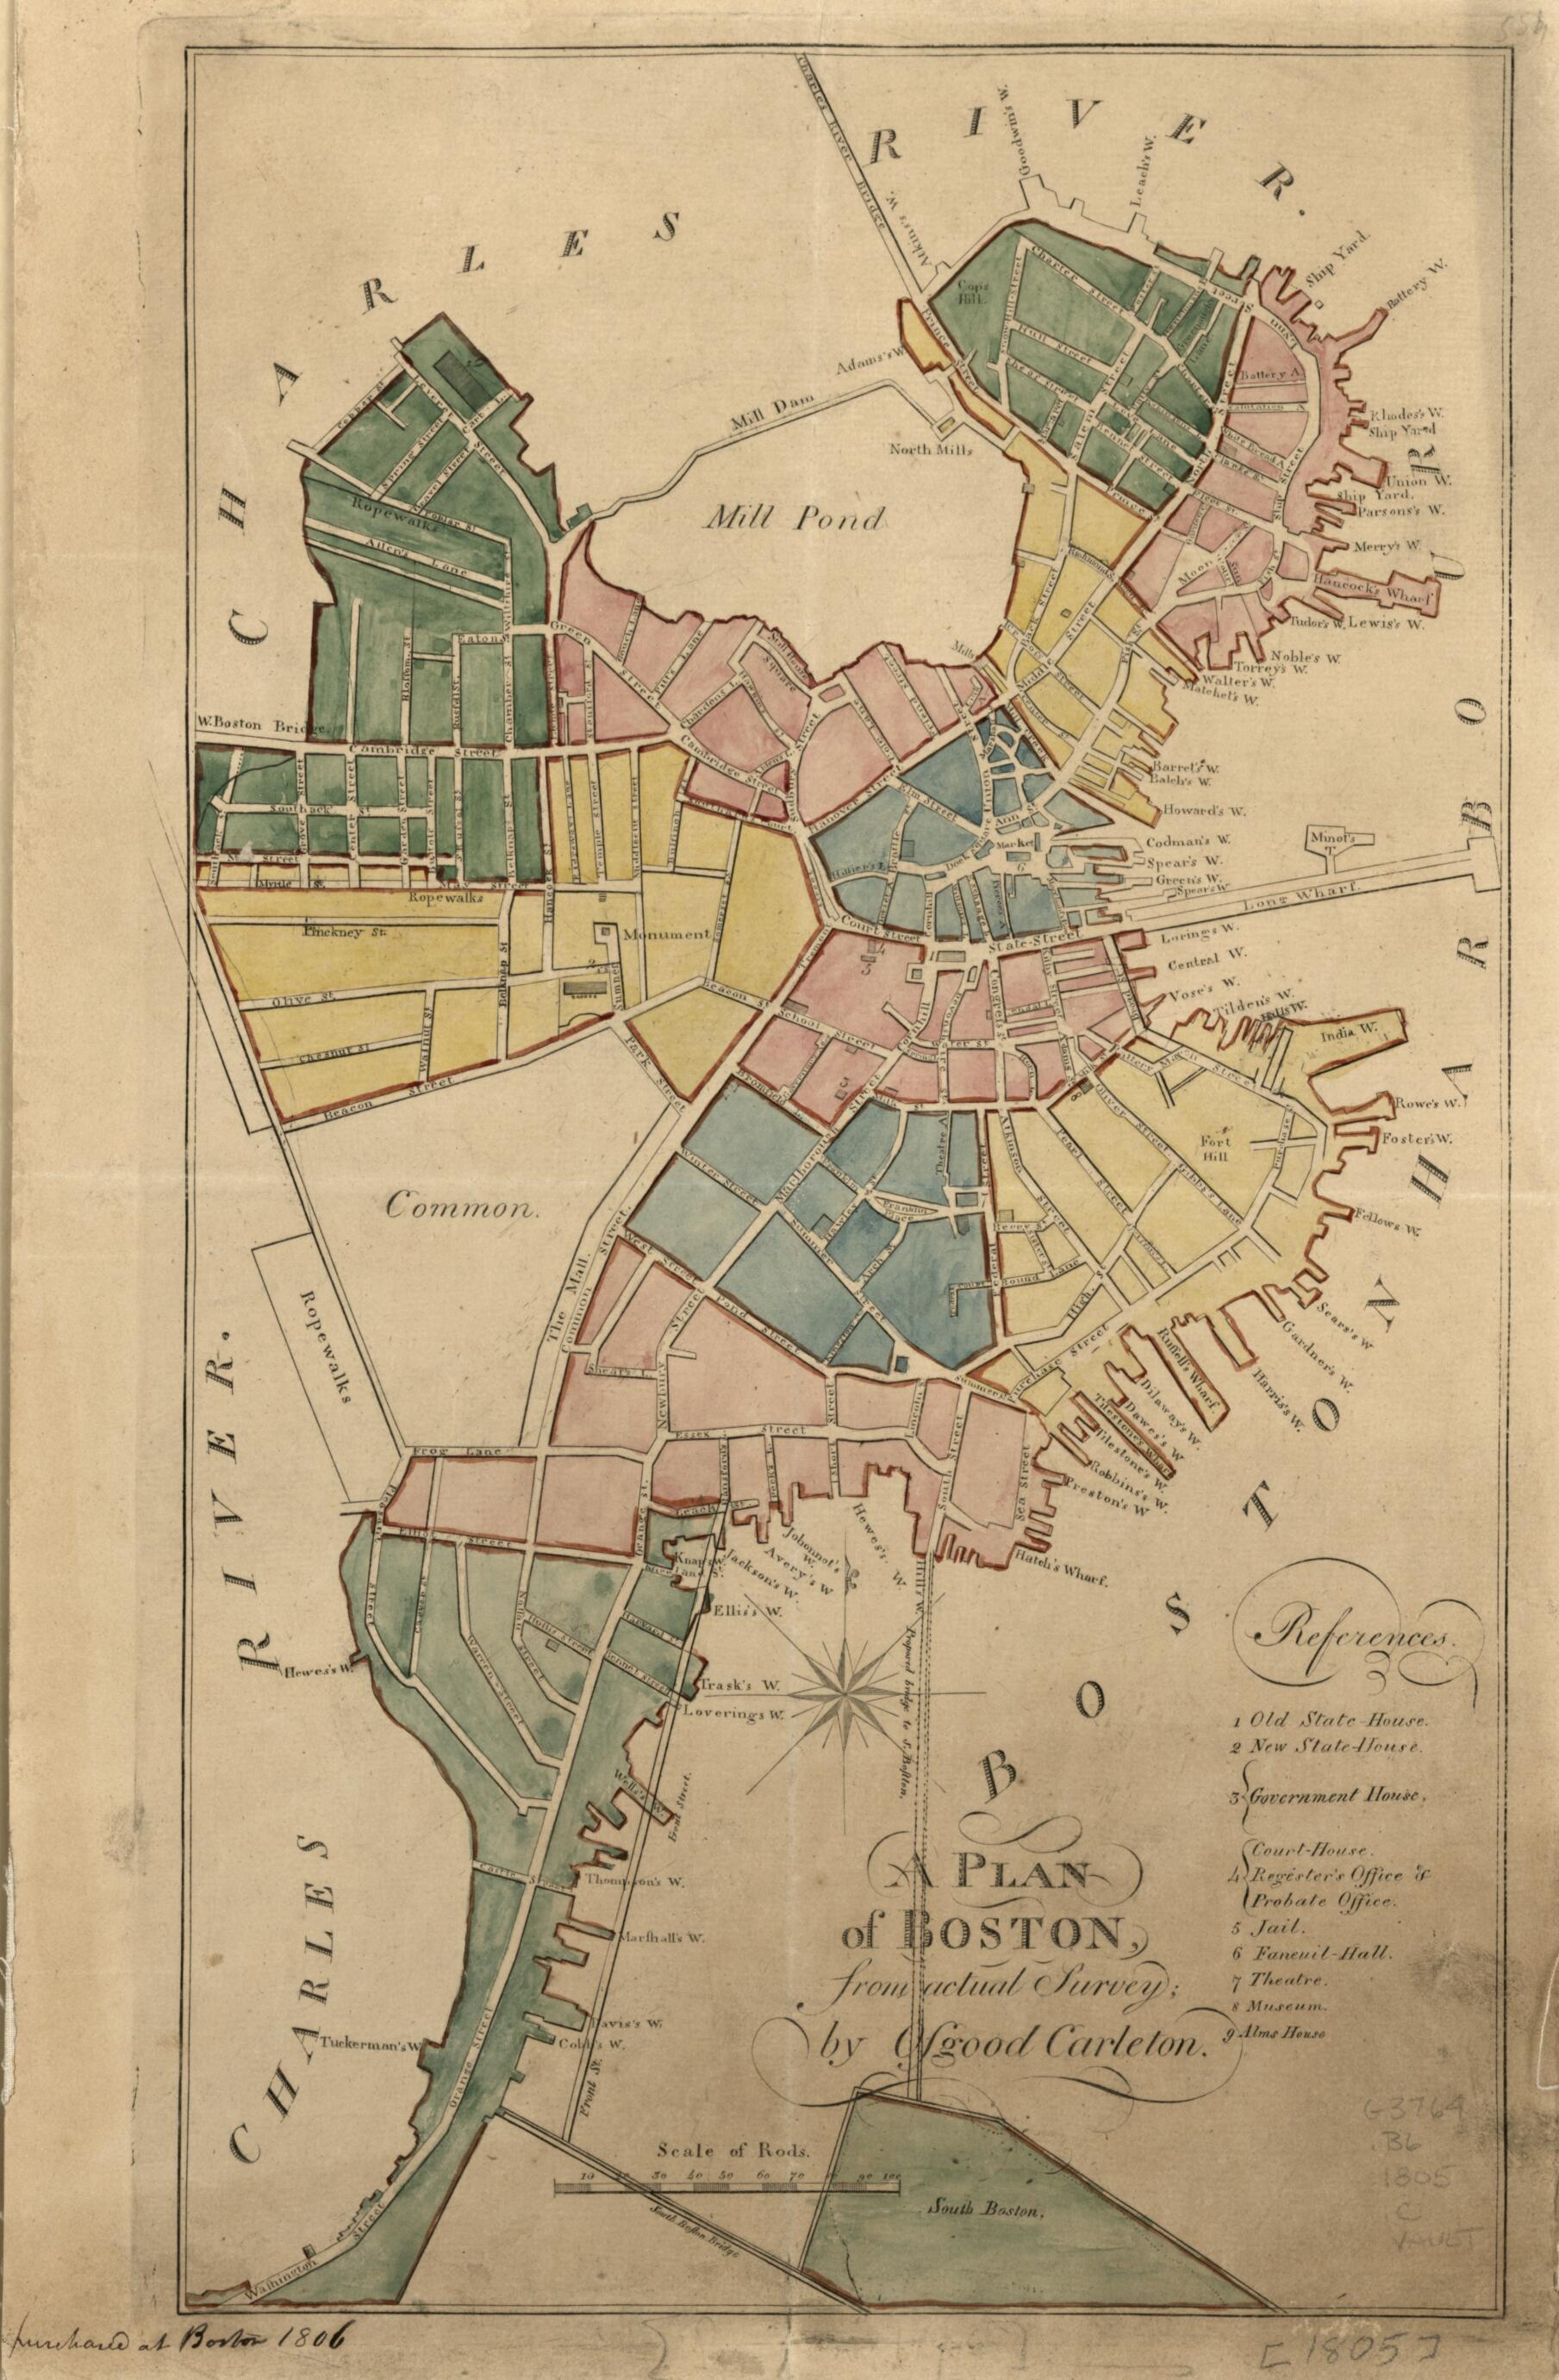 This old map of A Plan of Boston : from Actual Survey from 1805 was created by Osgood Carleton in 1805